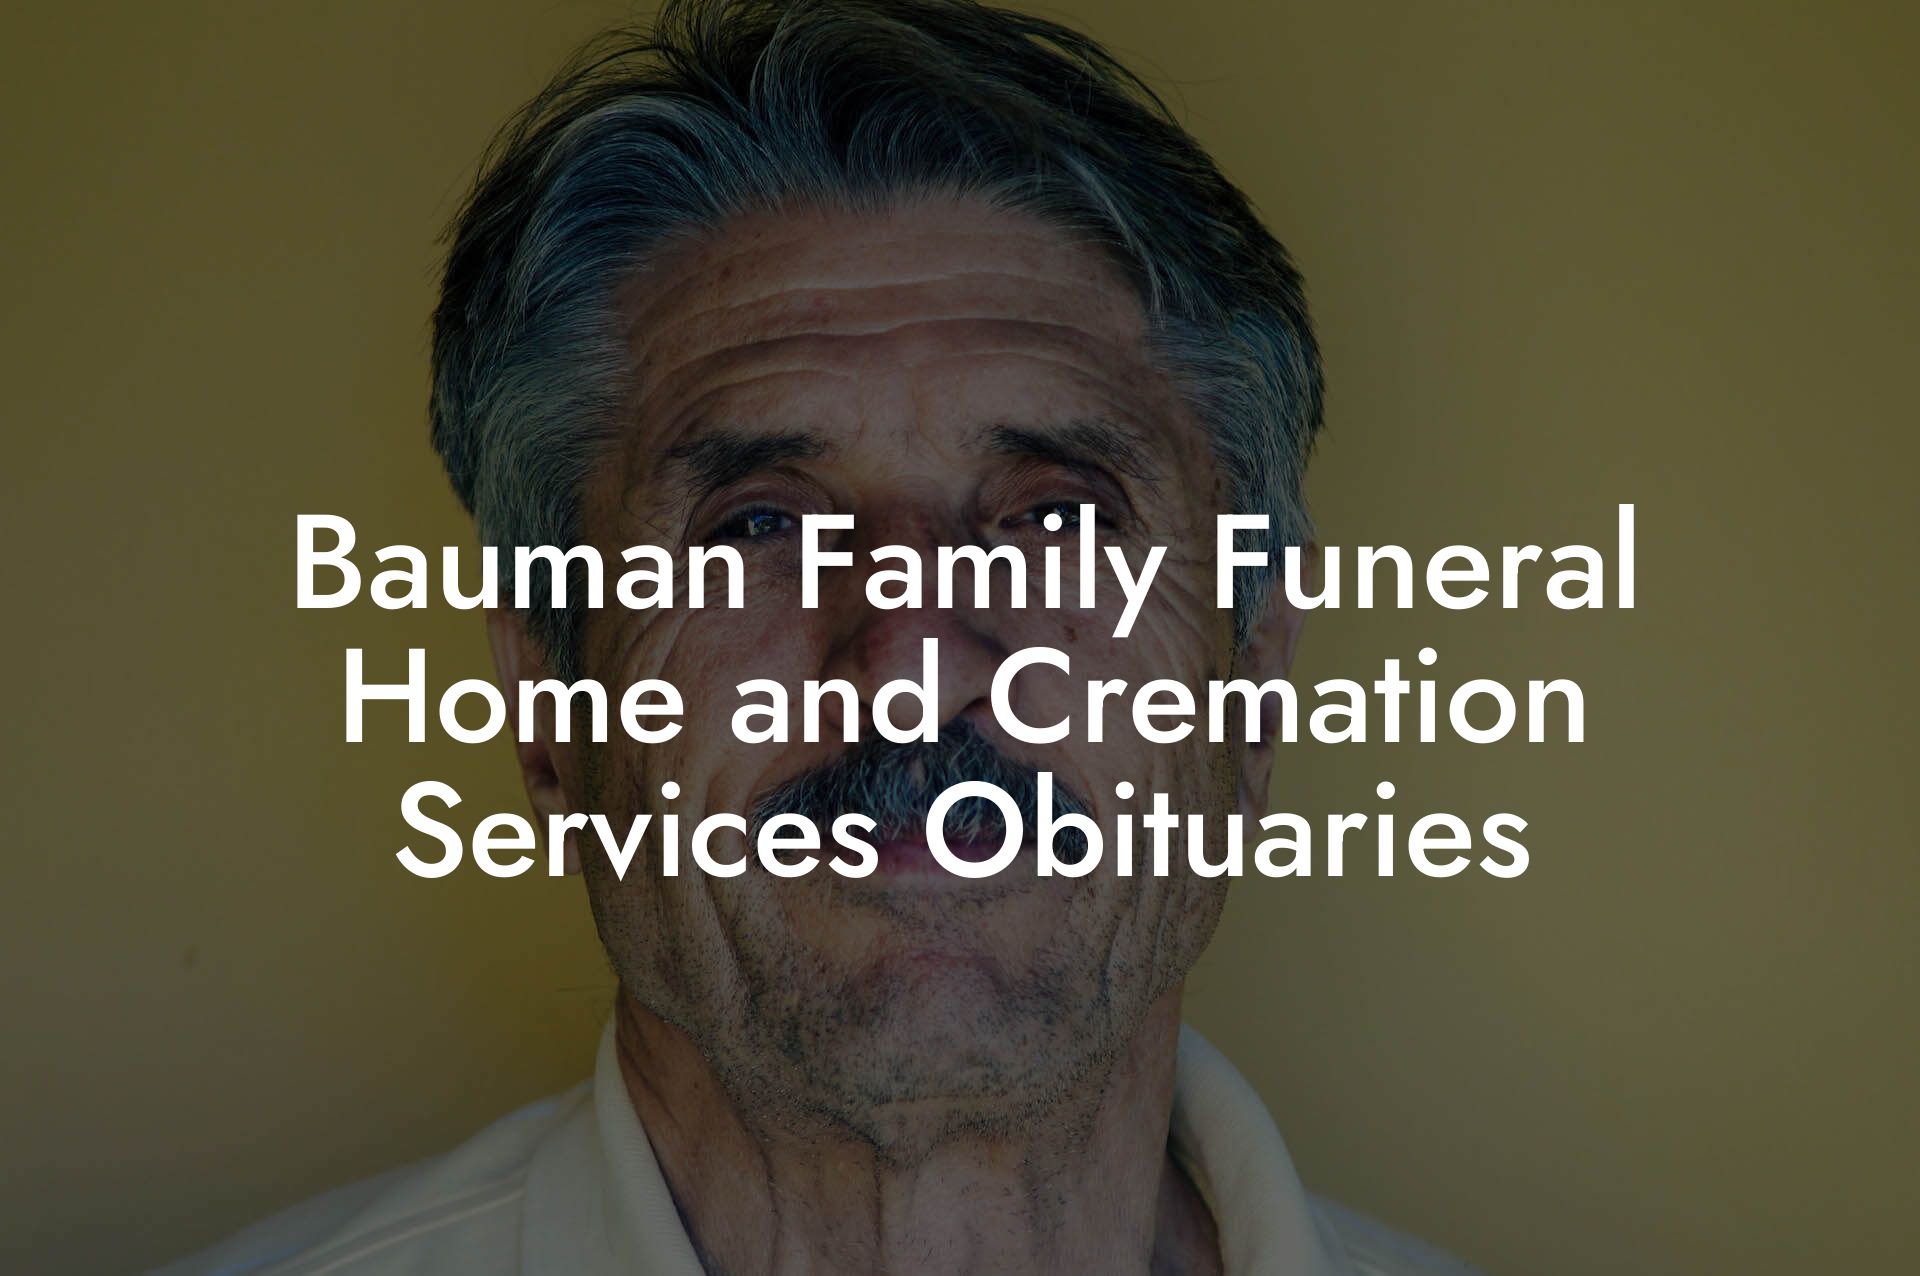 Bauman Family Funeral Home and Cremation Services Obituaries